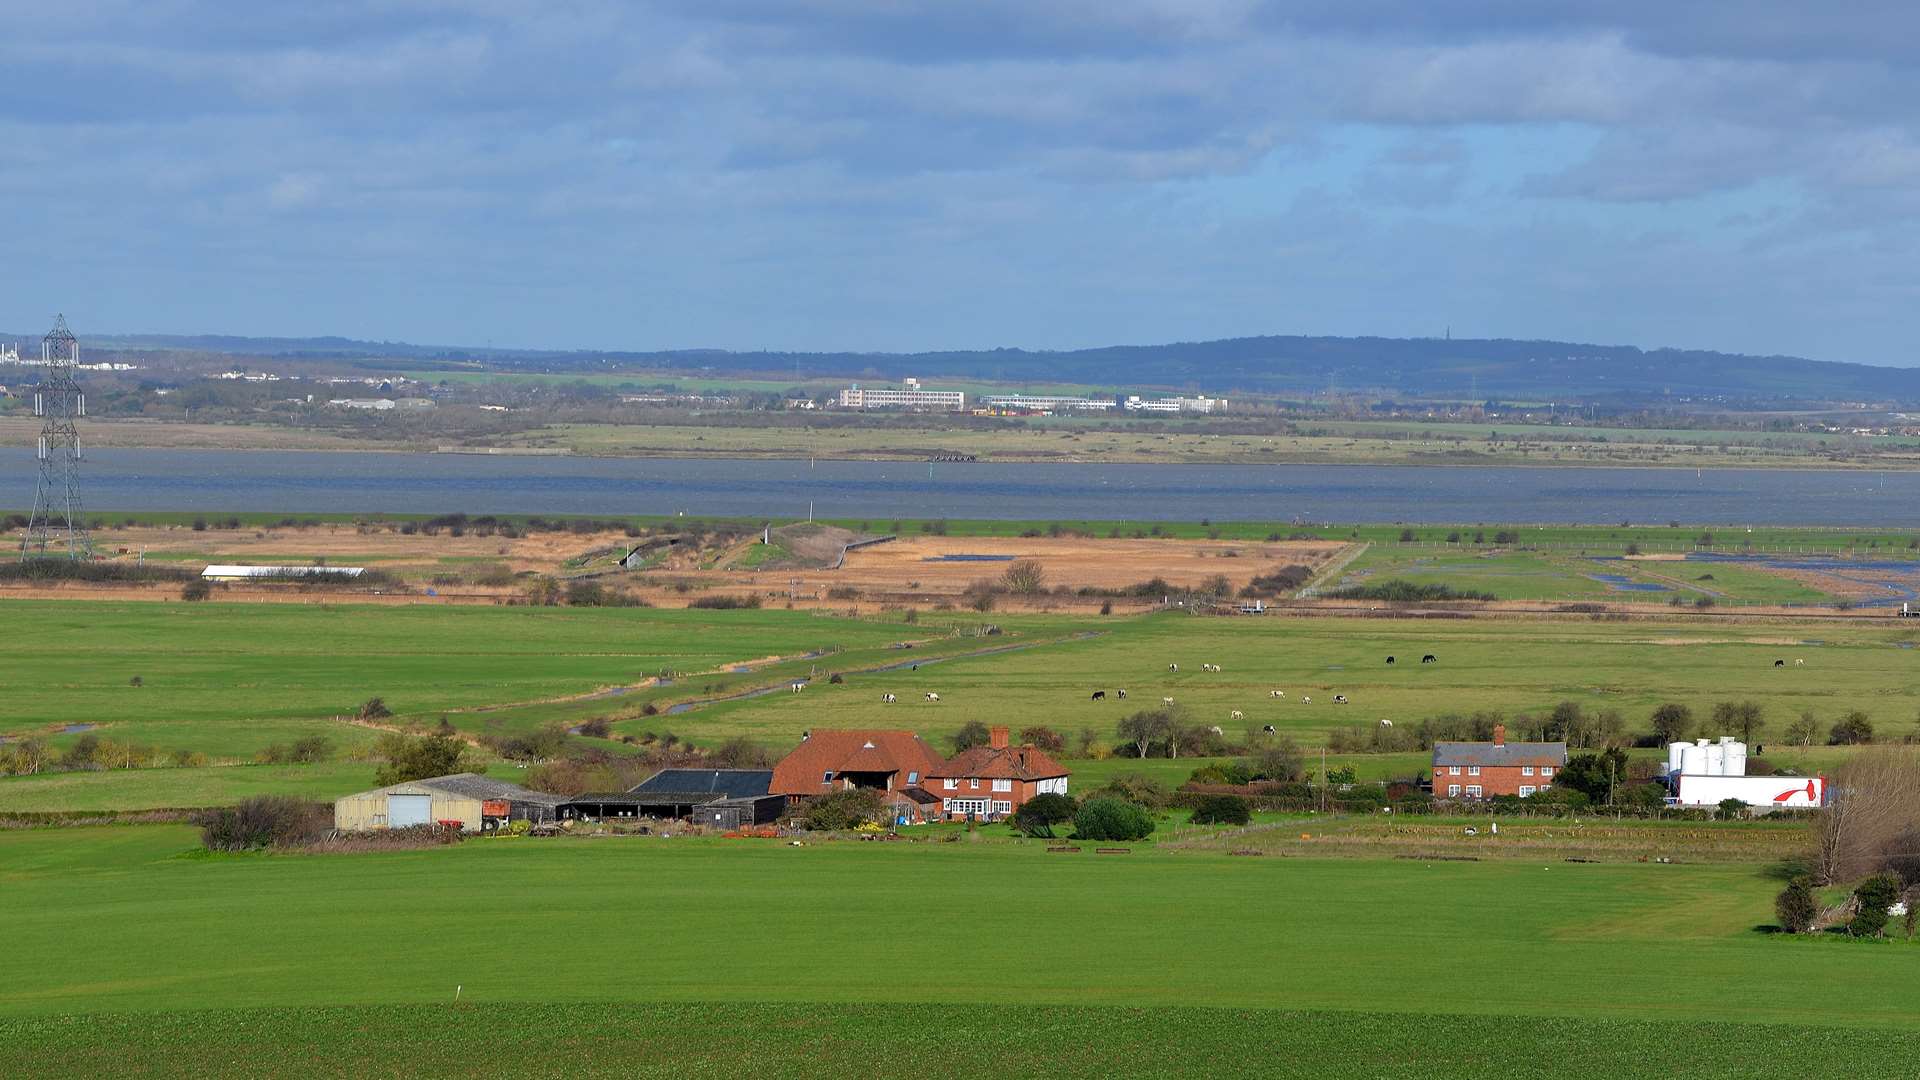 A panoramic view of Shorne, which could have a large dual carriageway through it